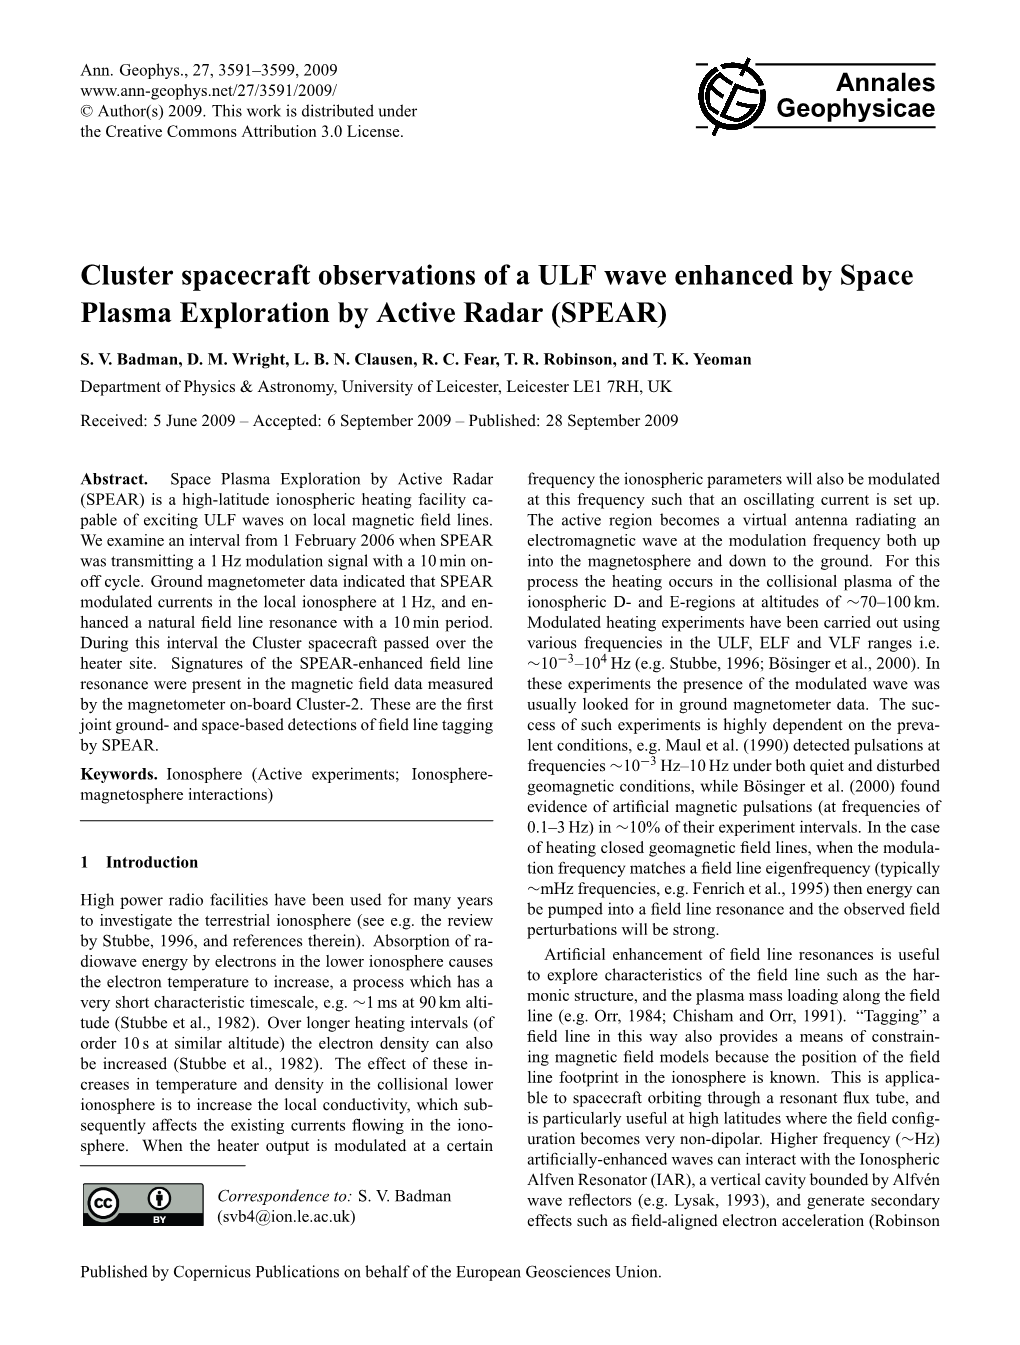 Cluster Spacecraft Observations of a ULF Wave Enhanced by Space Plasma Exploration by Active Radar (SPEAR)